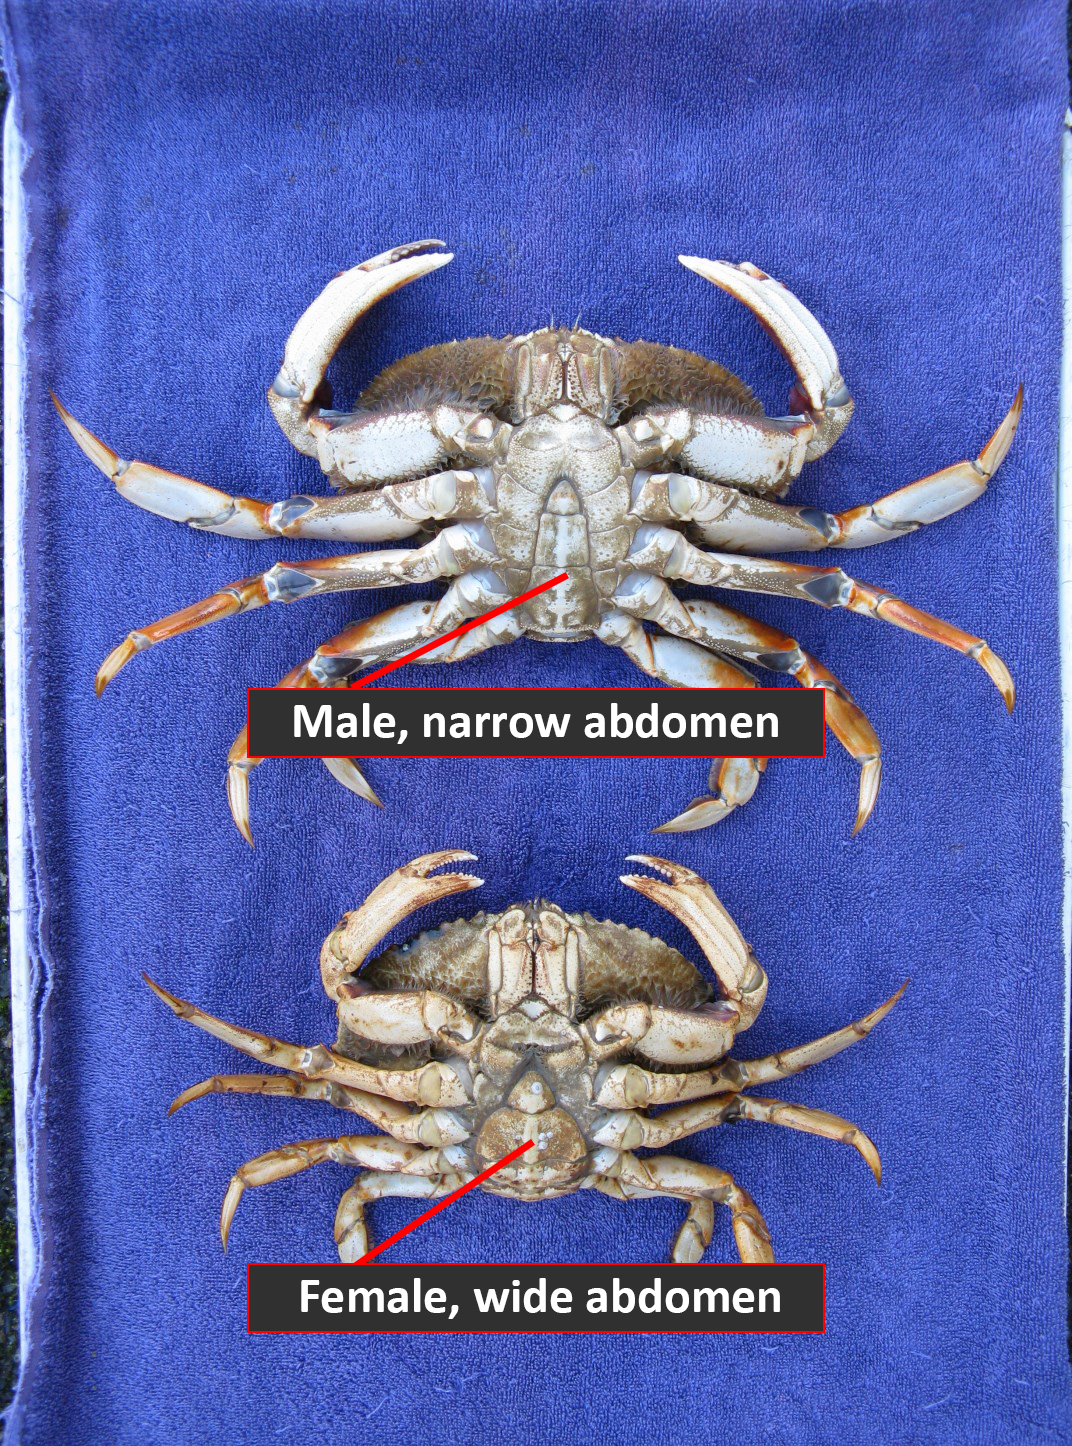 Female Dungeness crab have wider abdomens than males